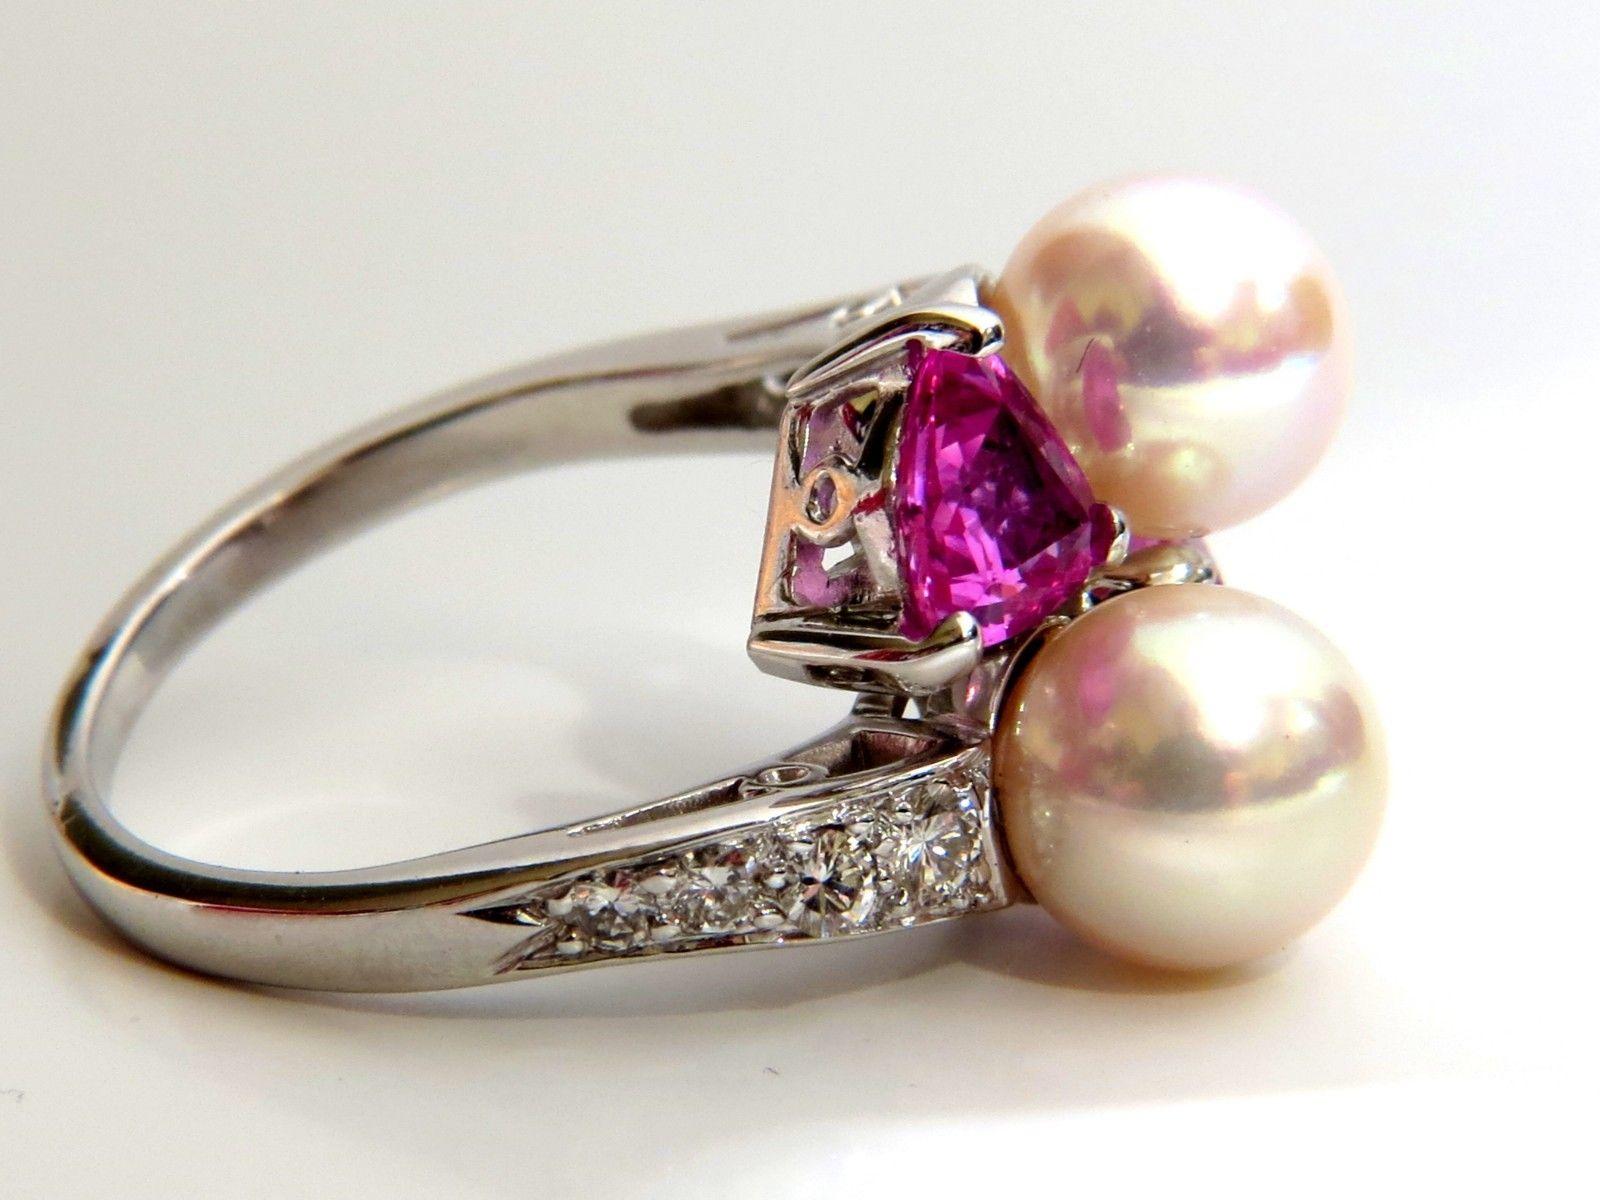 Pearl Cocktail Mod Deco

7.8mm natural South Seas pearl ring

Excellent AAA Quality

Natural Pink Sapphires: 2.20ct

.50ct round diamonds. 

G-color Vs-2 clarity.

Platinum

8.8 grams.

Current ring size: 7.25

We may resize, Please inquire.